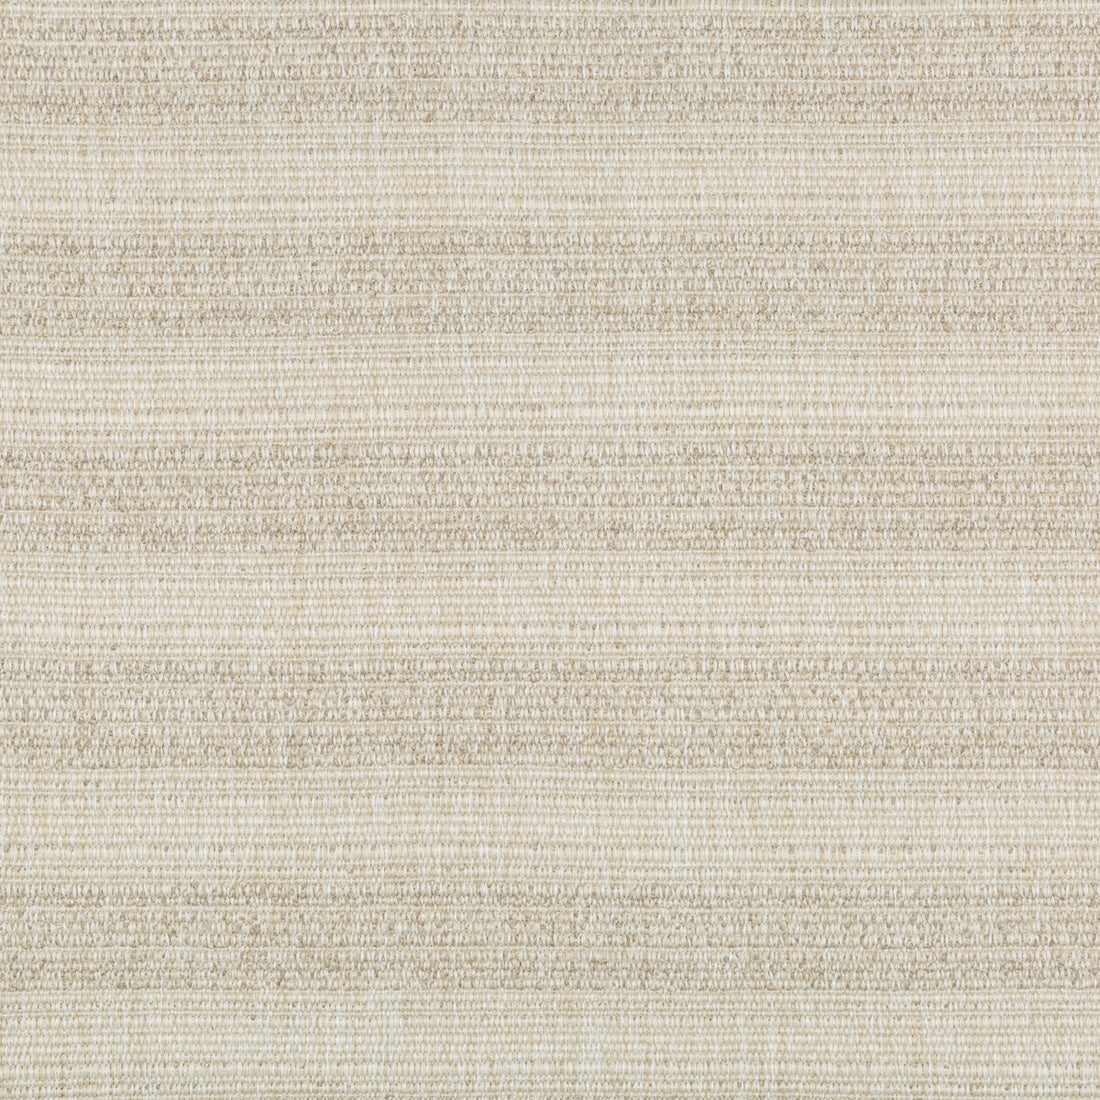 Kravet Couture fabric in 36613-116 color - pattern 36613.116.0 - by Kravet Couture in the Mabley Handler collection